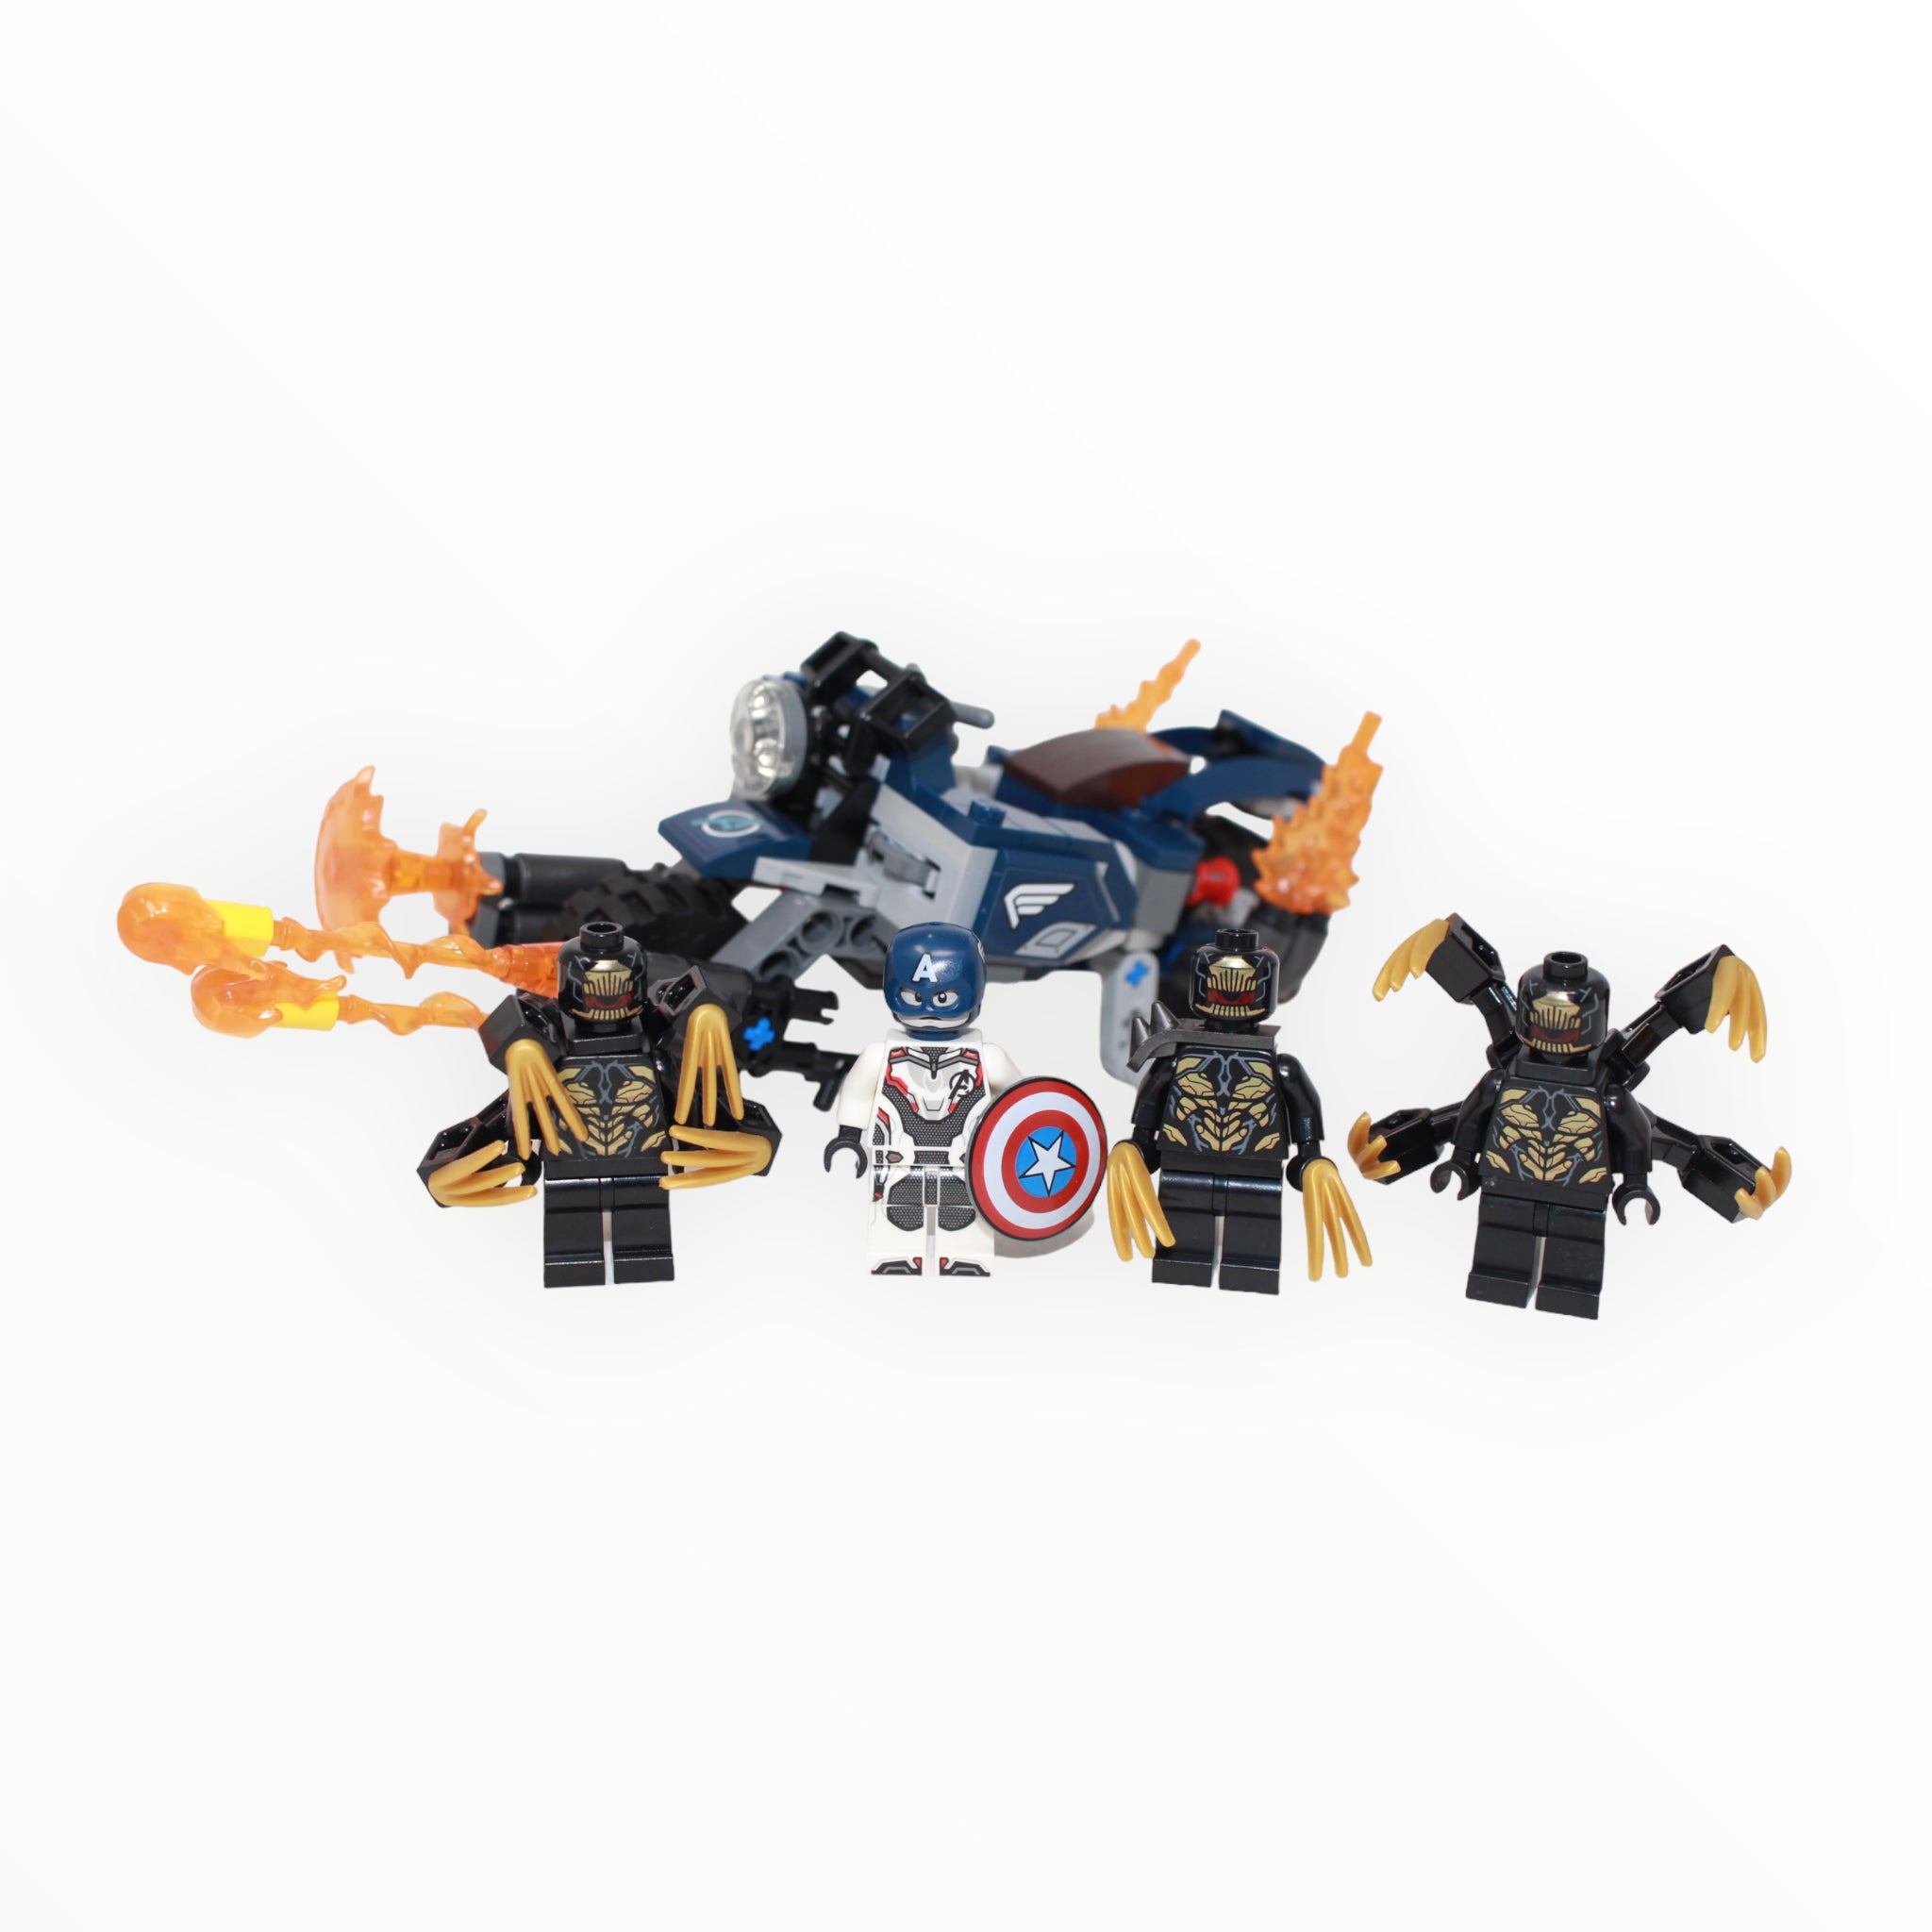 Used Set 76123 Marvel Avengers Captain America: Outriders Attack